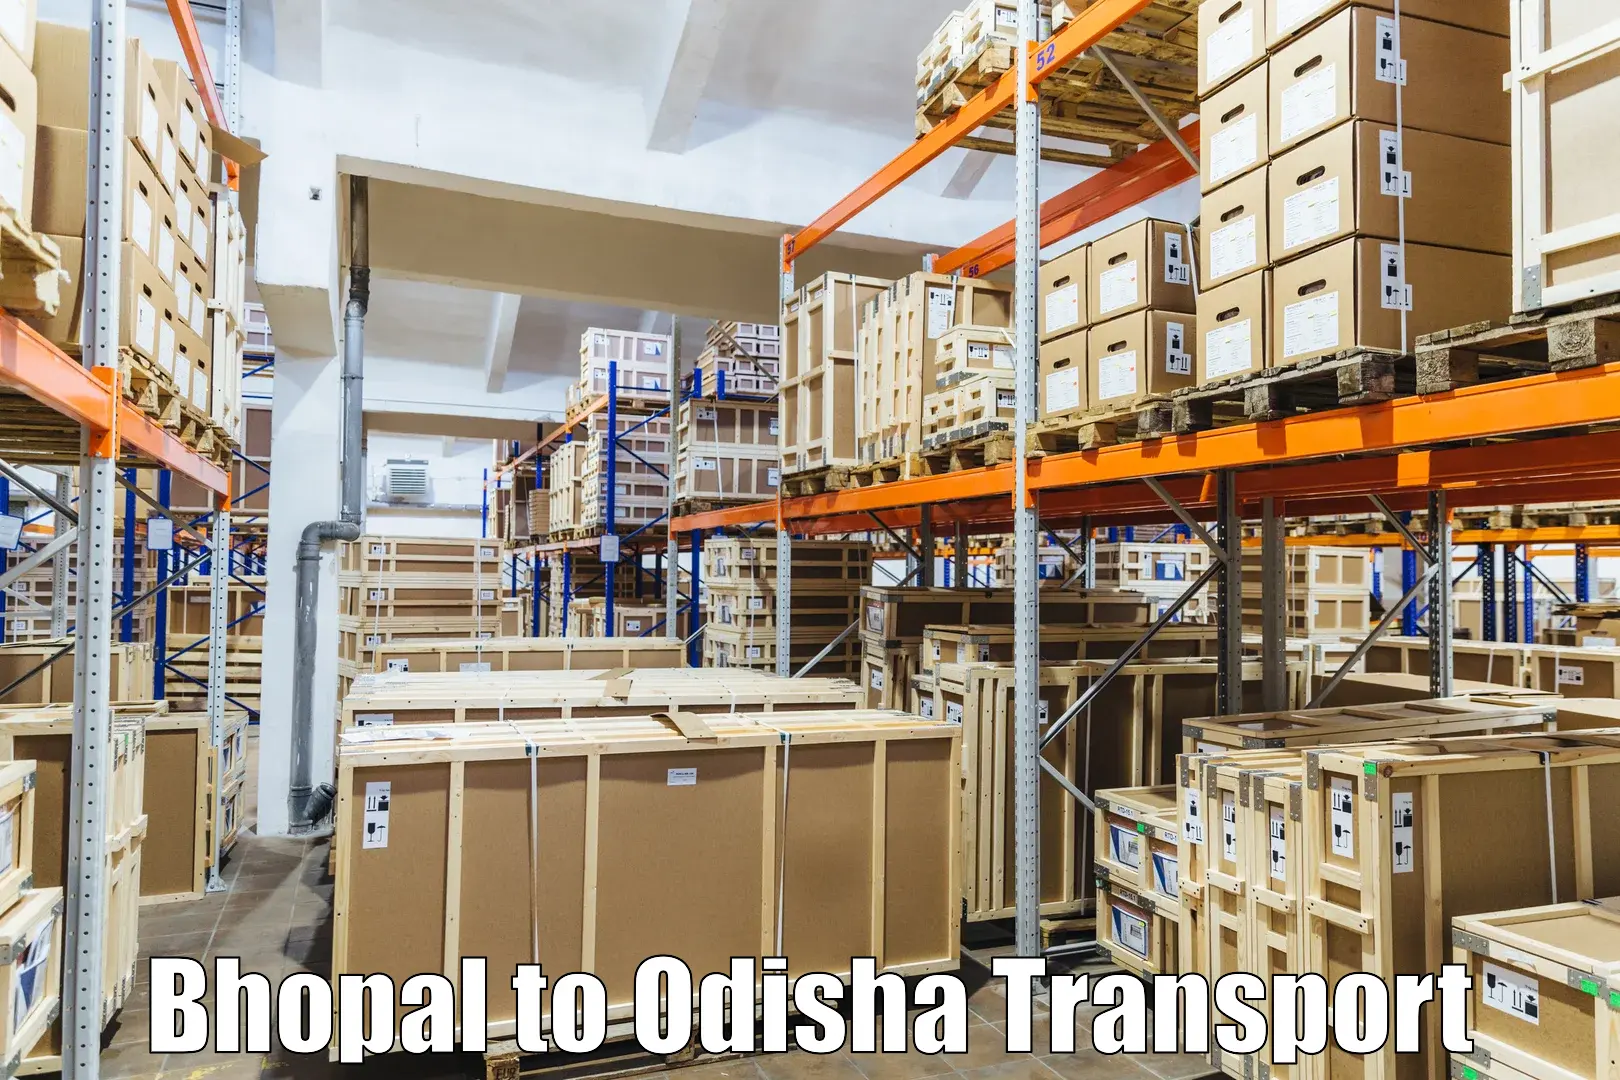 Truck transport companies in India Bhopal to Jharsuguda